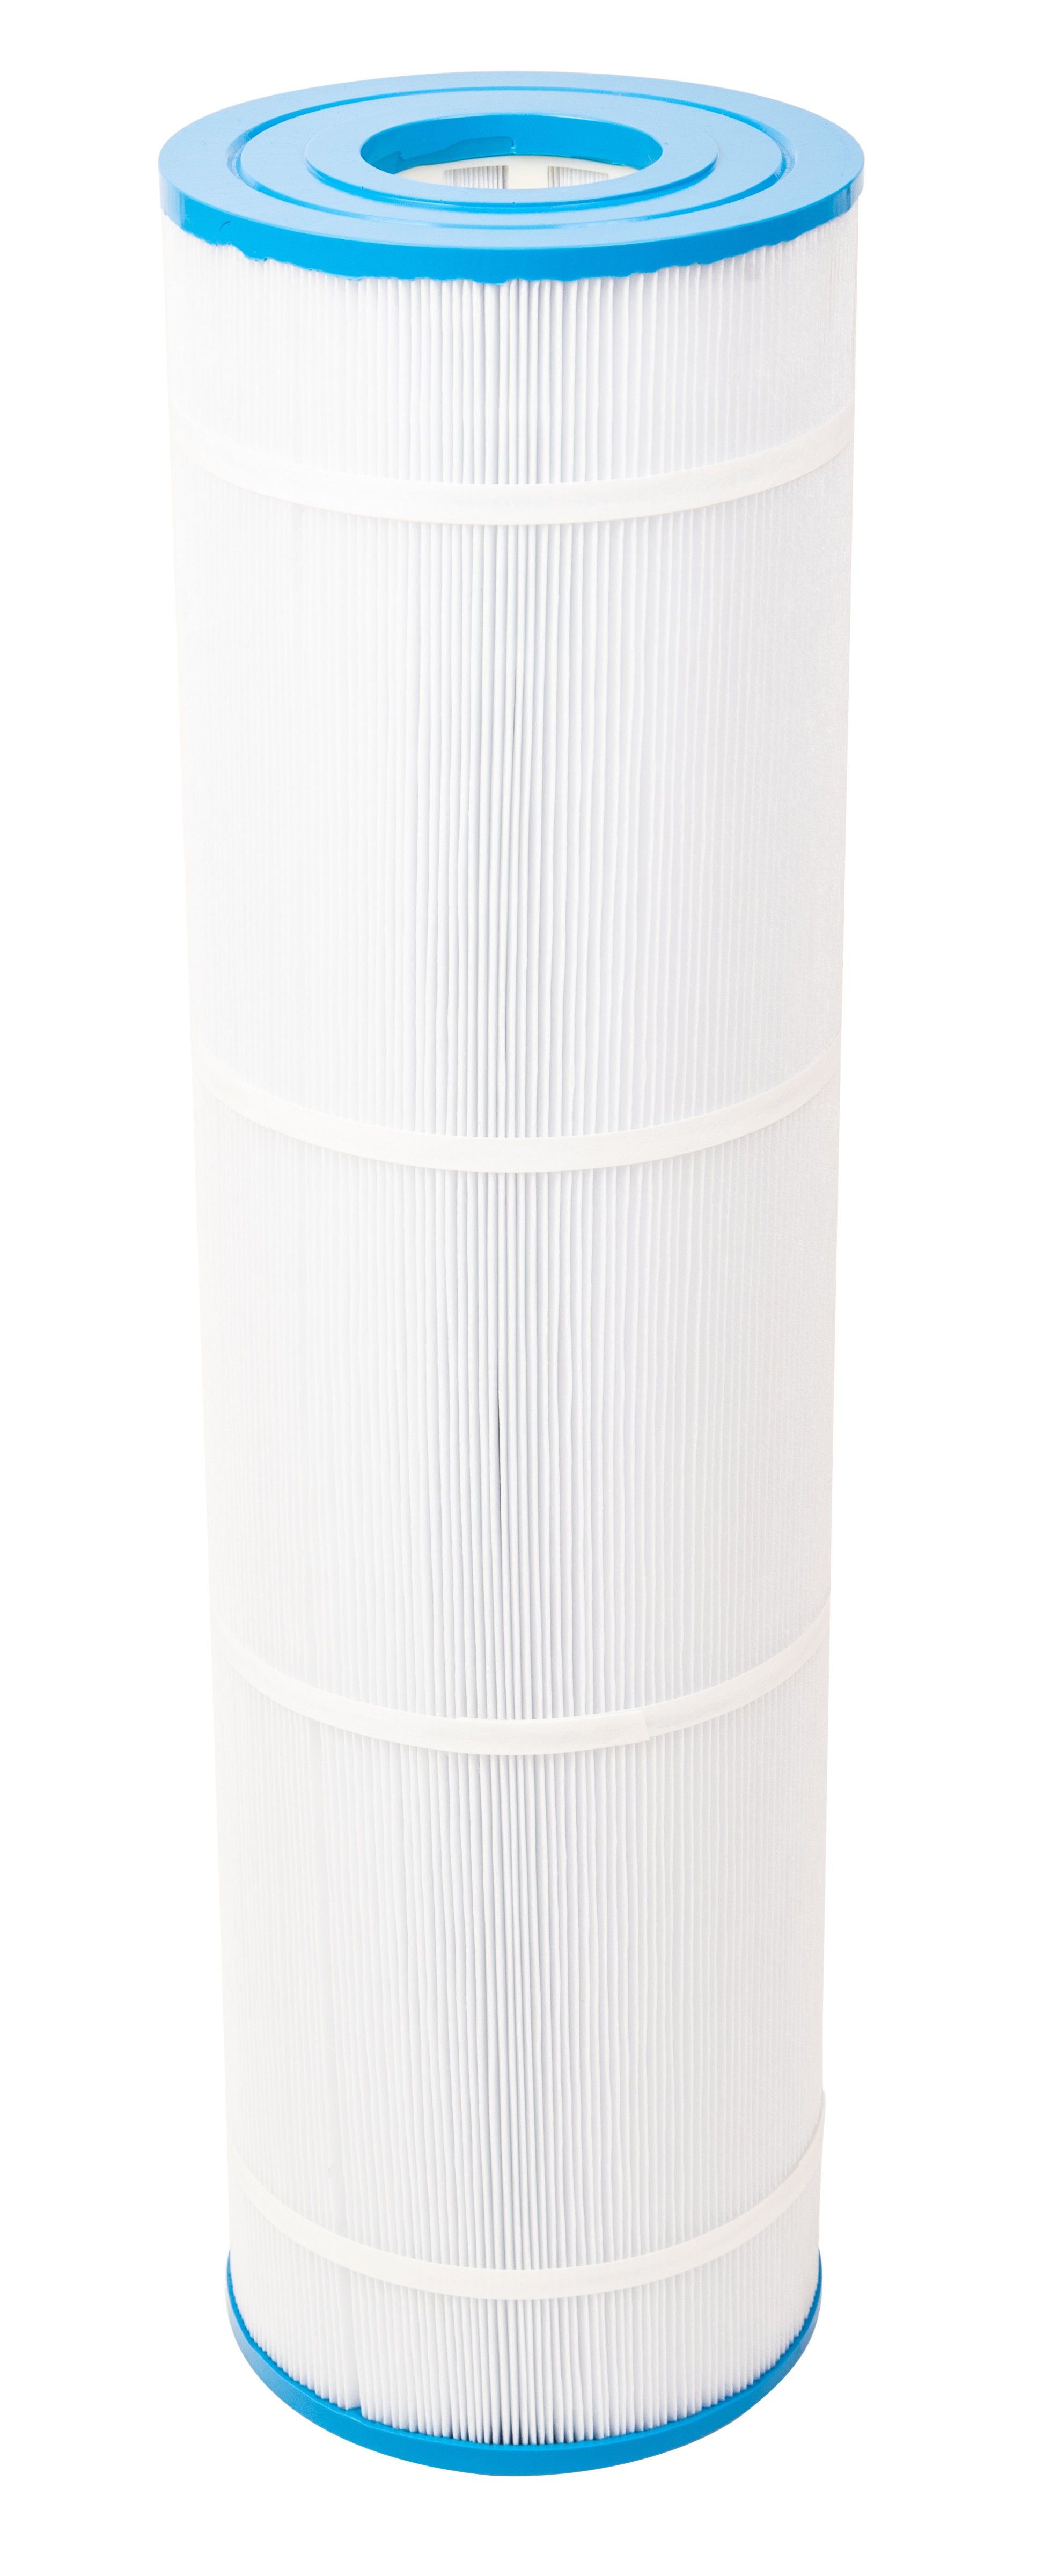 Replacement Cartridge for Cartridge Filter Model 73103000 - 200SF